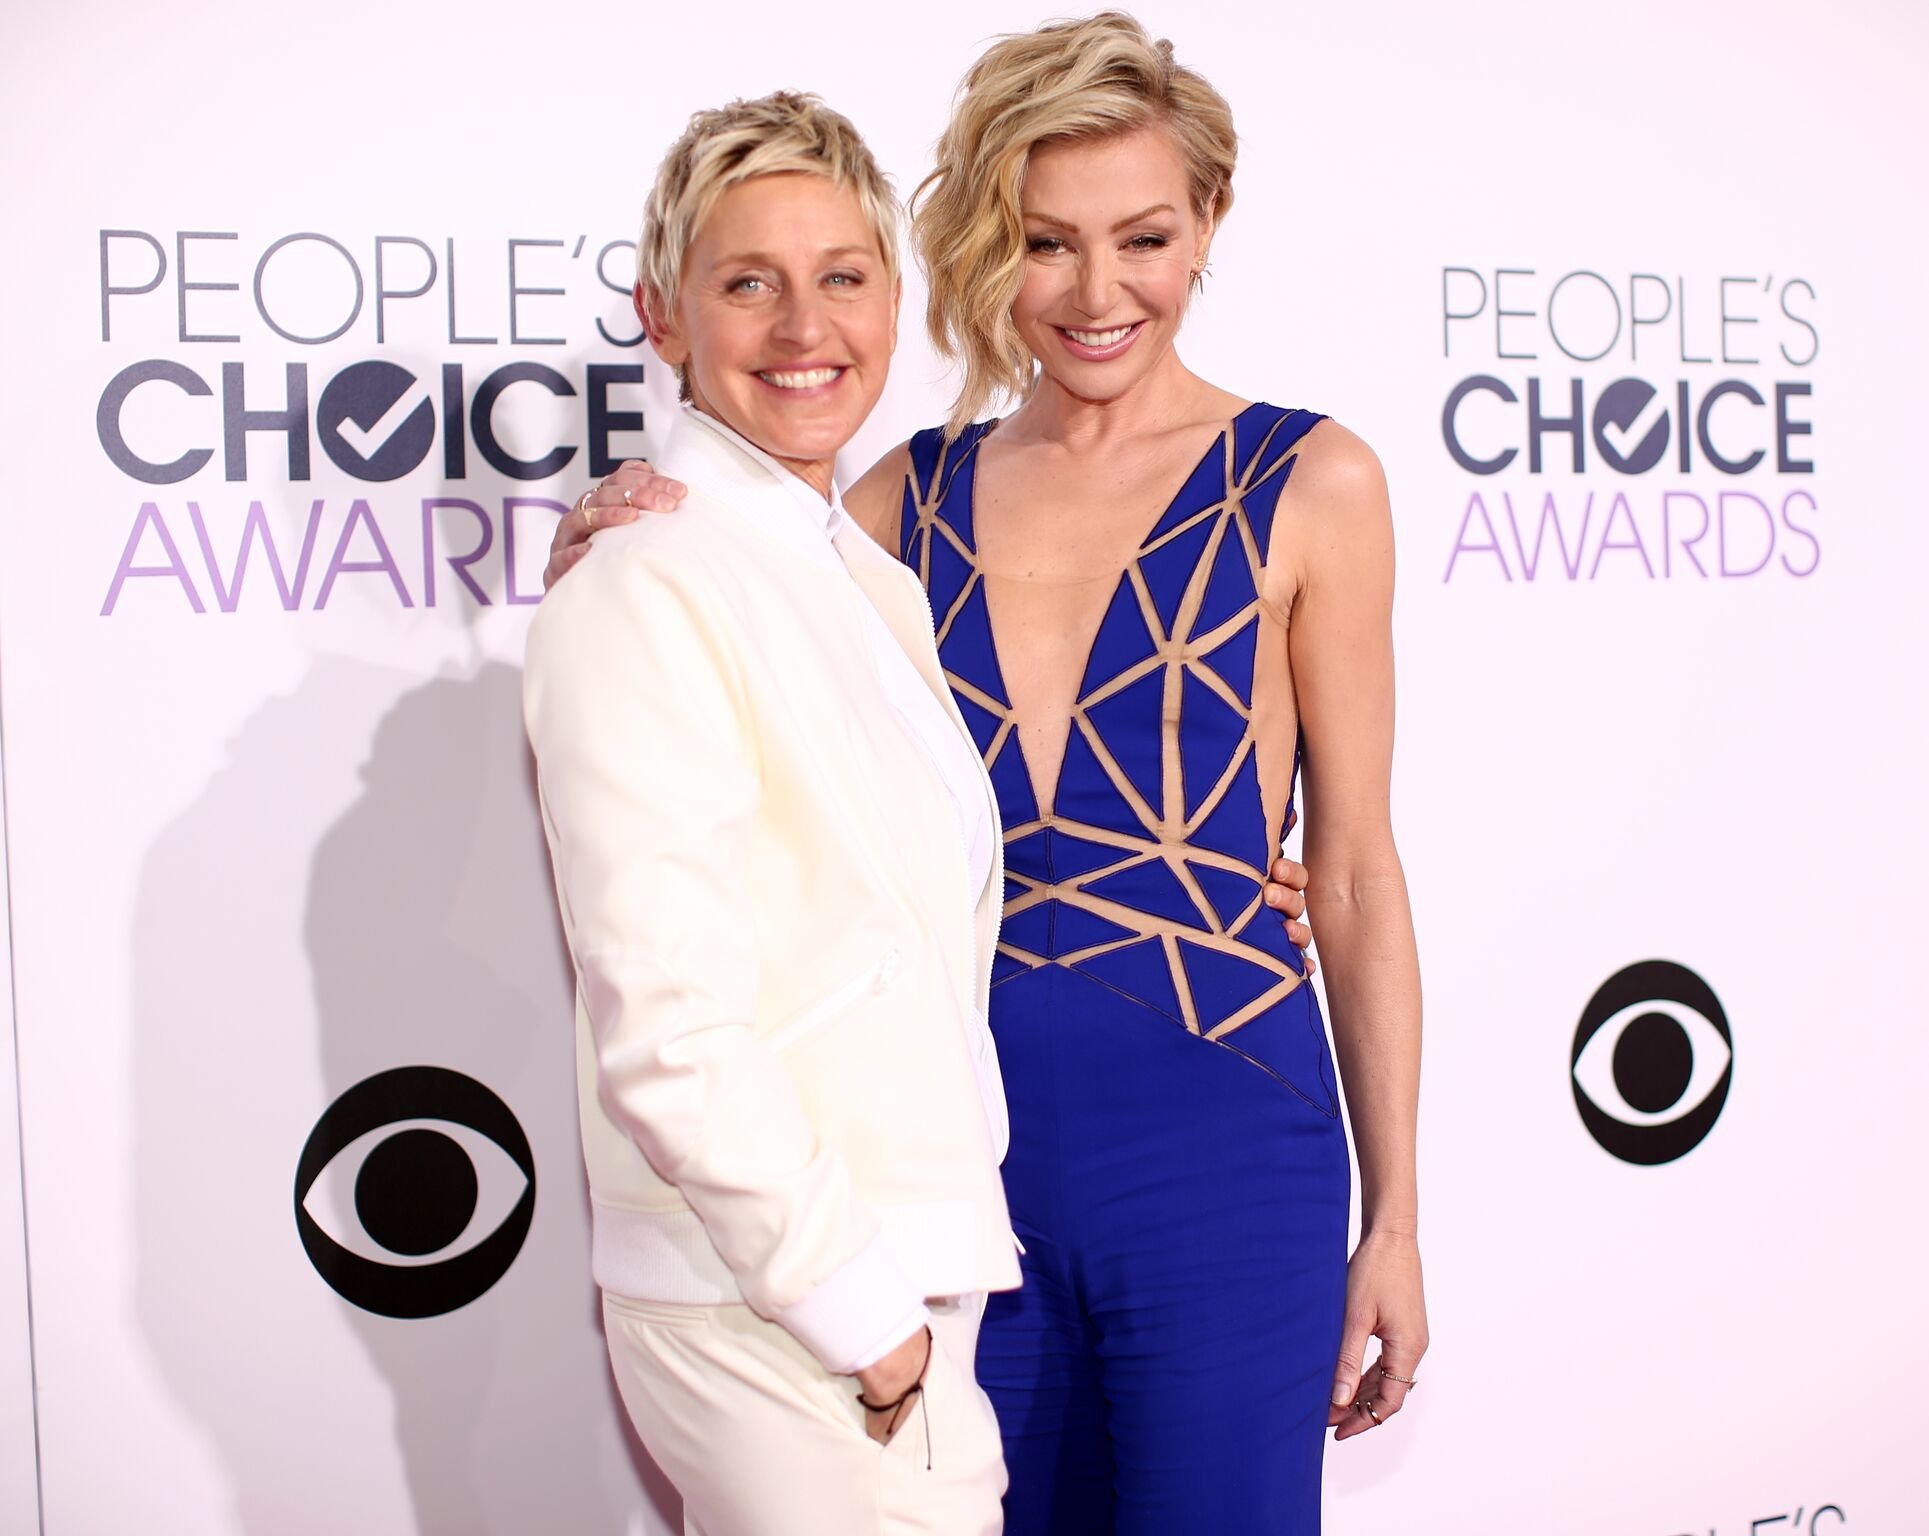 Ellen DeGeneres (L) and actress Portia de Rossi attend The 41st Annual People's Choice Awards at Nokia Theatre LA Live | Getty Images